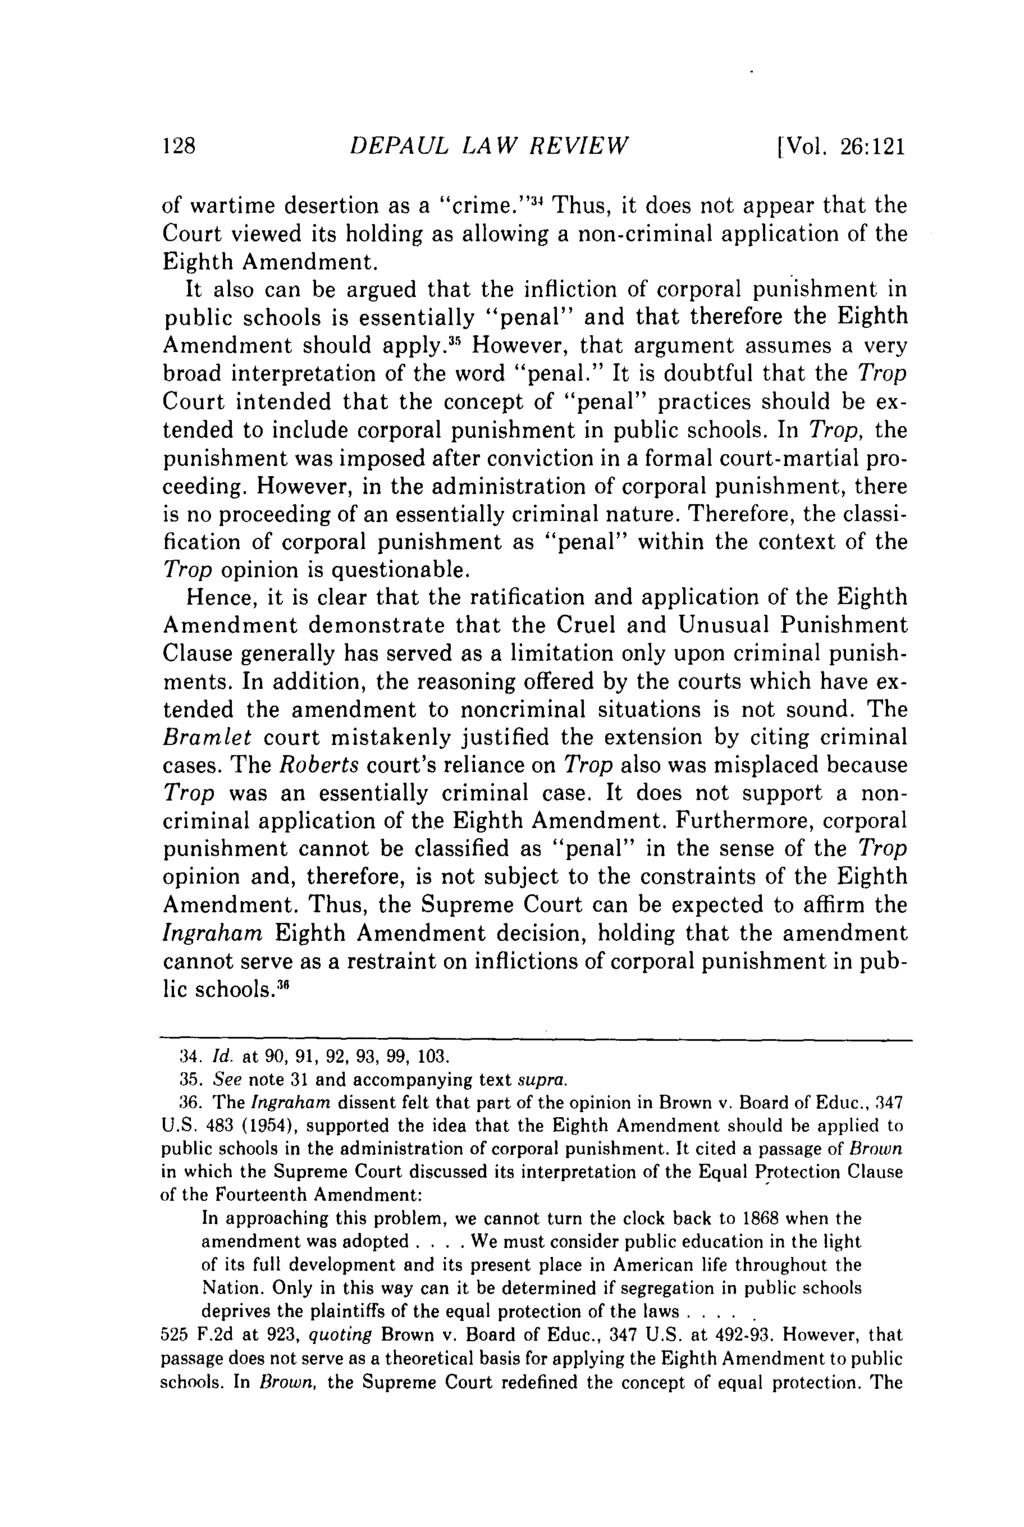 DEPAUL LAW REVIEW I[Vol. 26:121 of wartime desertion as a "crime."'" Thus, it does not appear that the Court viewed its holding as allowing a non-criminal application of the Eighth Amendment.